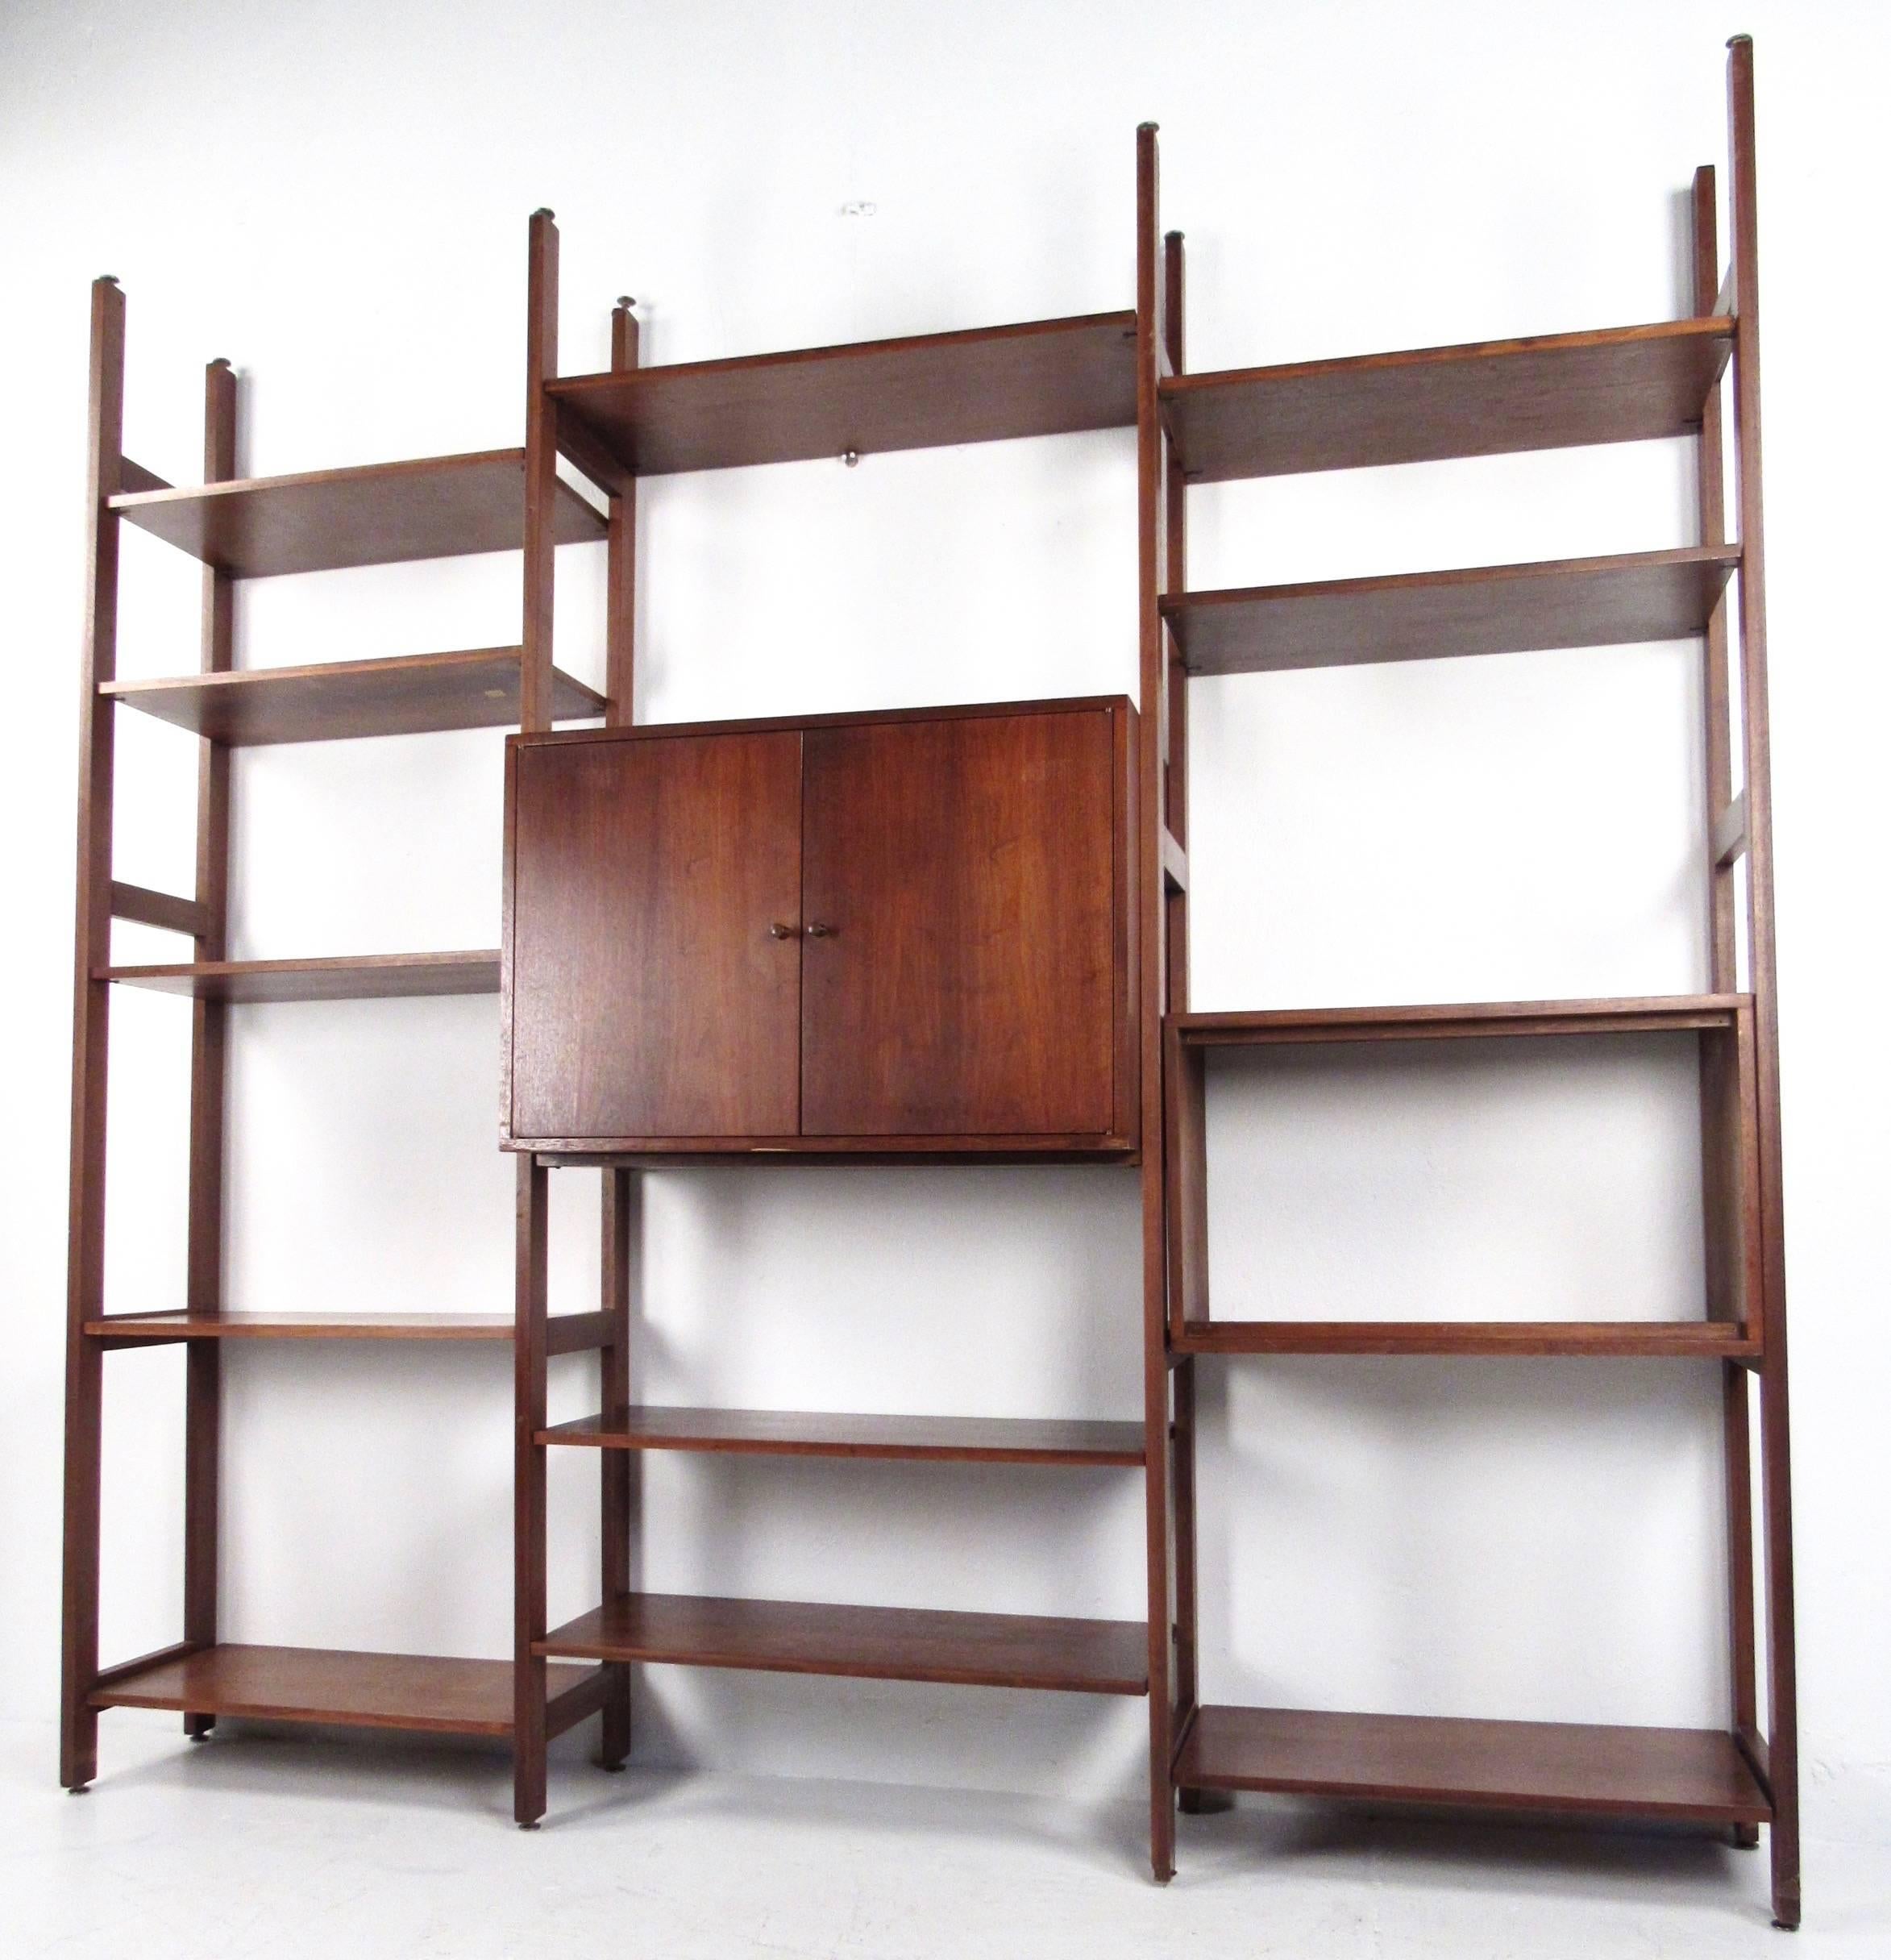 This impressive vintage walnut entertainment unit offers a wide variety of shelf space for display and storage, as well as a center cabinet for concealed organization. Adjustable shelf and cabinet placement allows you to modify the unit to your